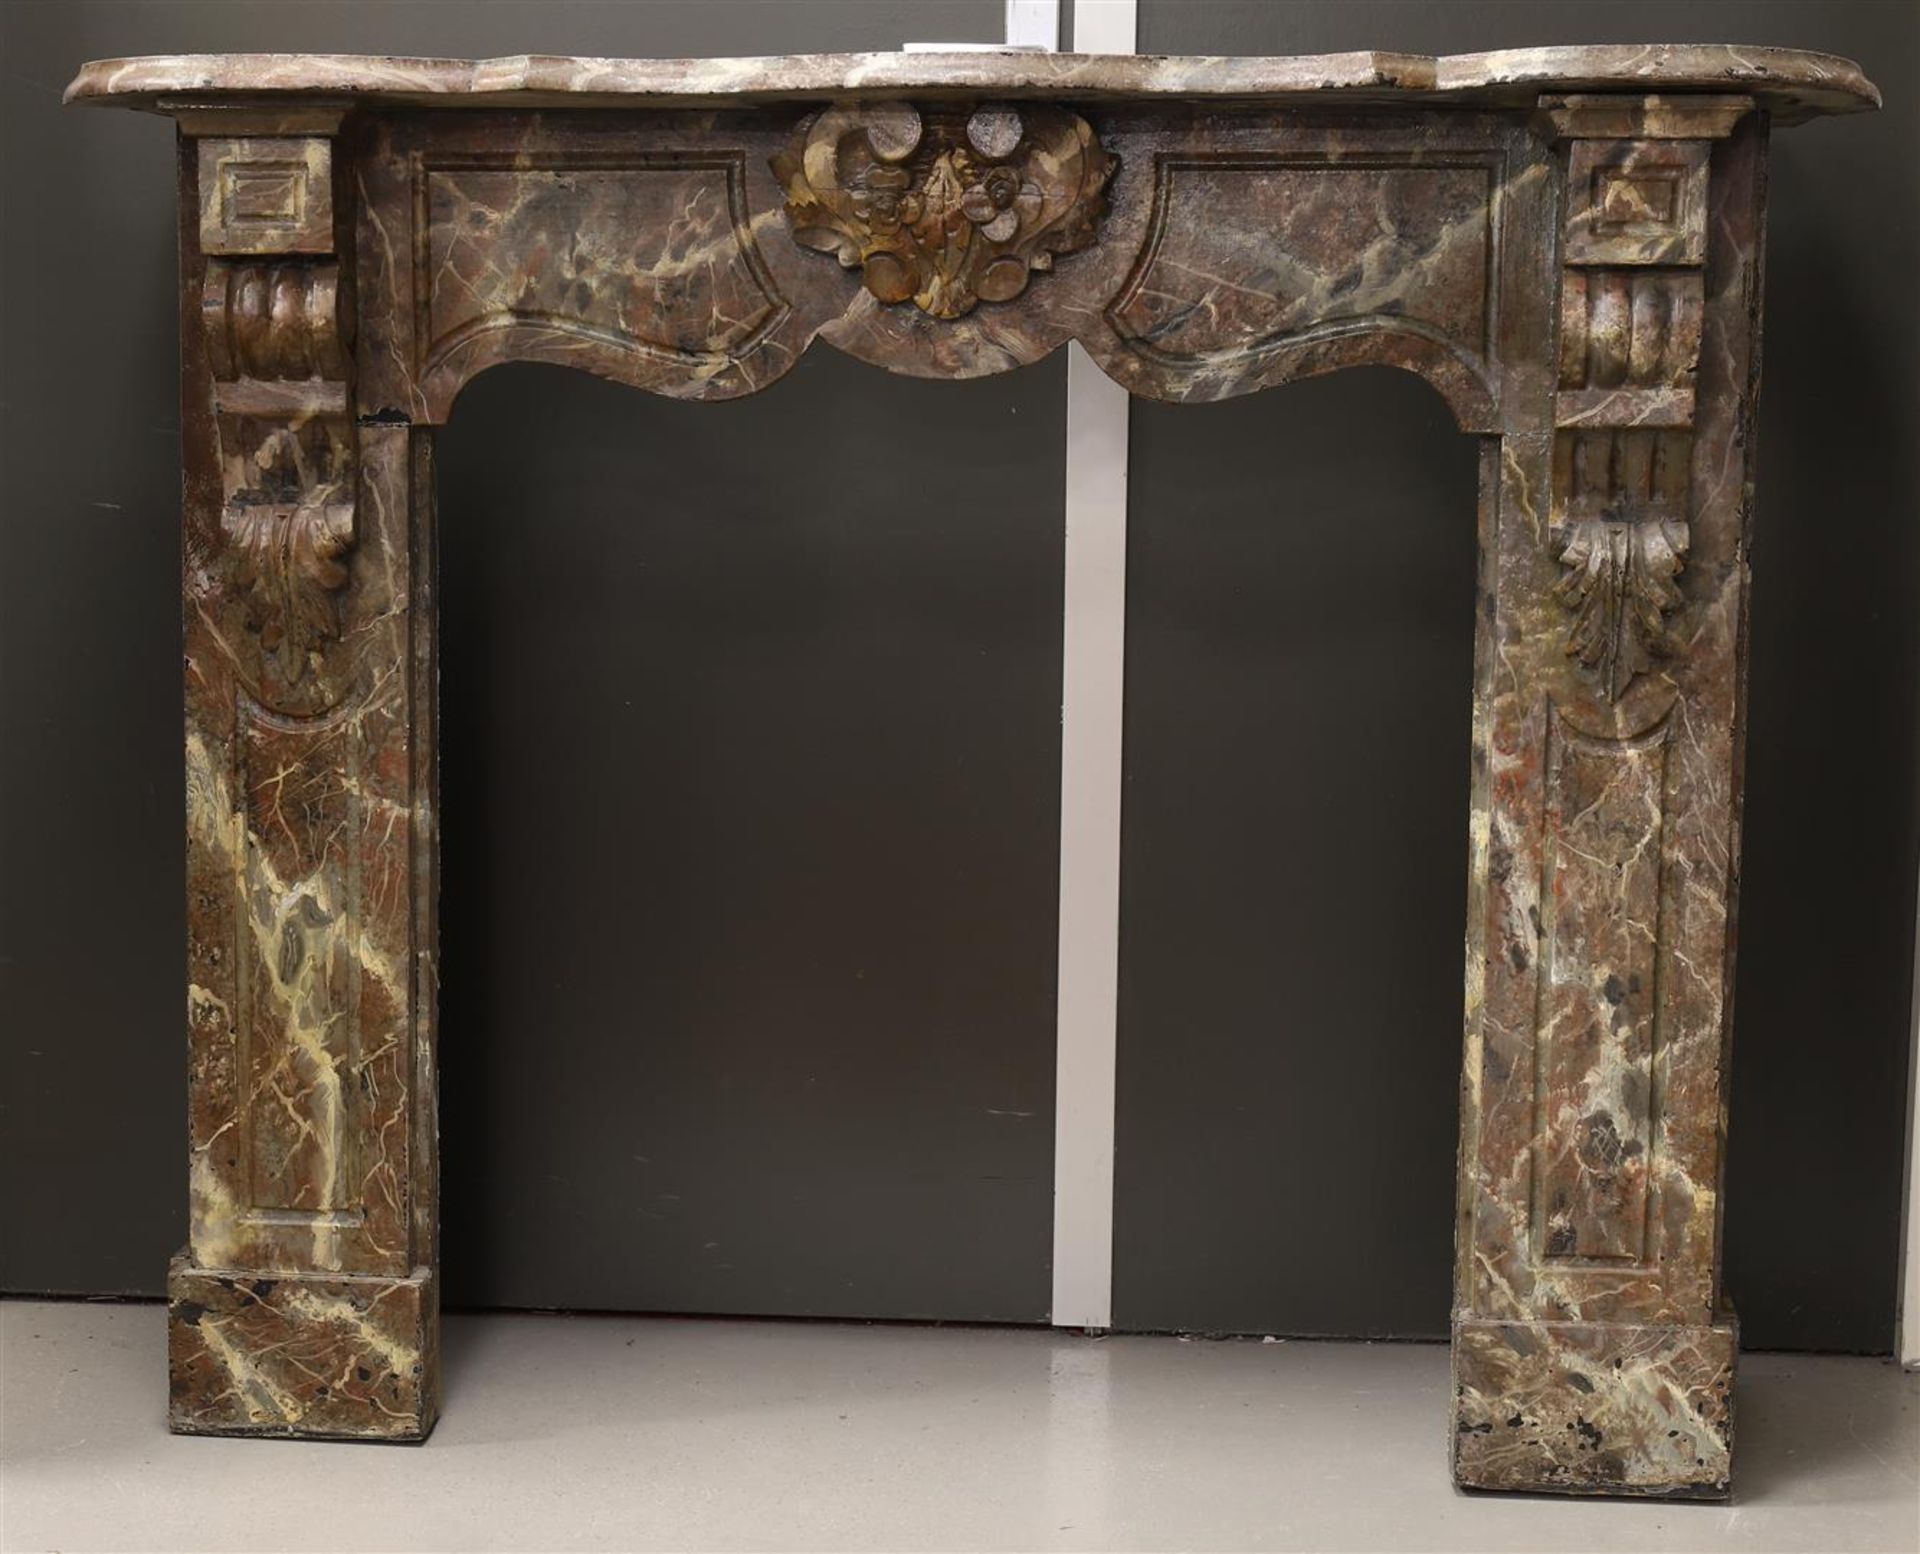 A marbled wooden mantelpiece, Louis WV style, Holland 19th century, h 104 x w 129 x d 44 cm.